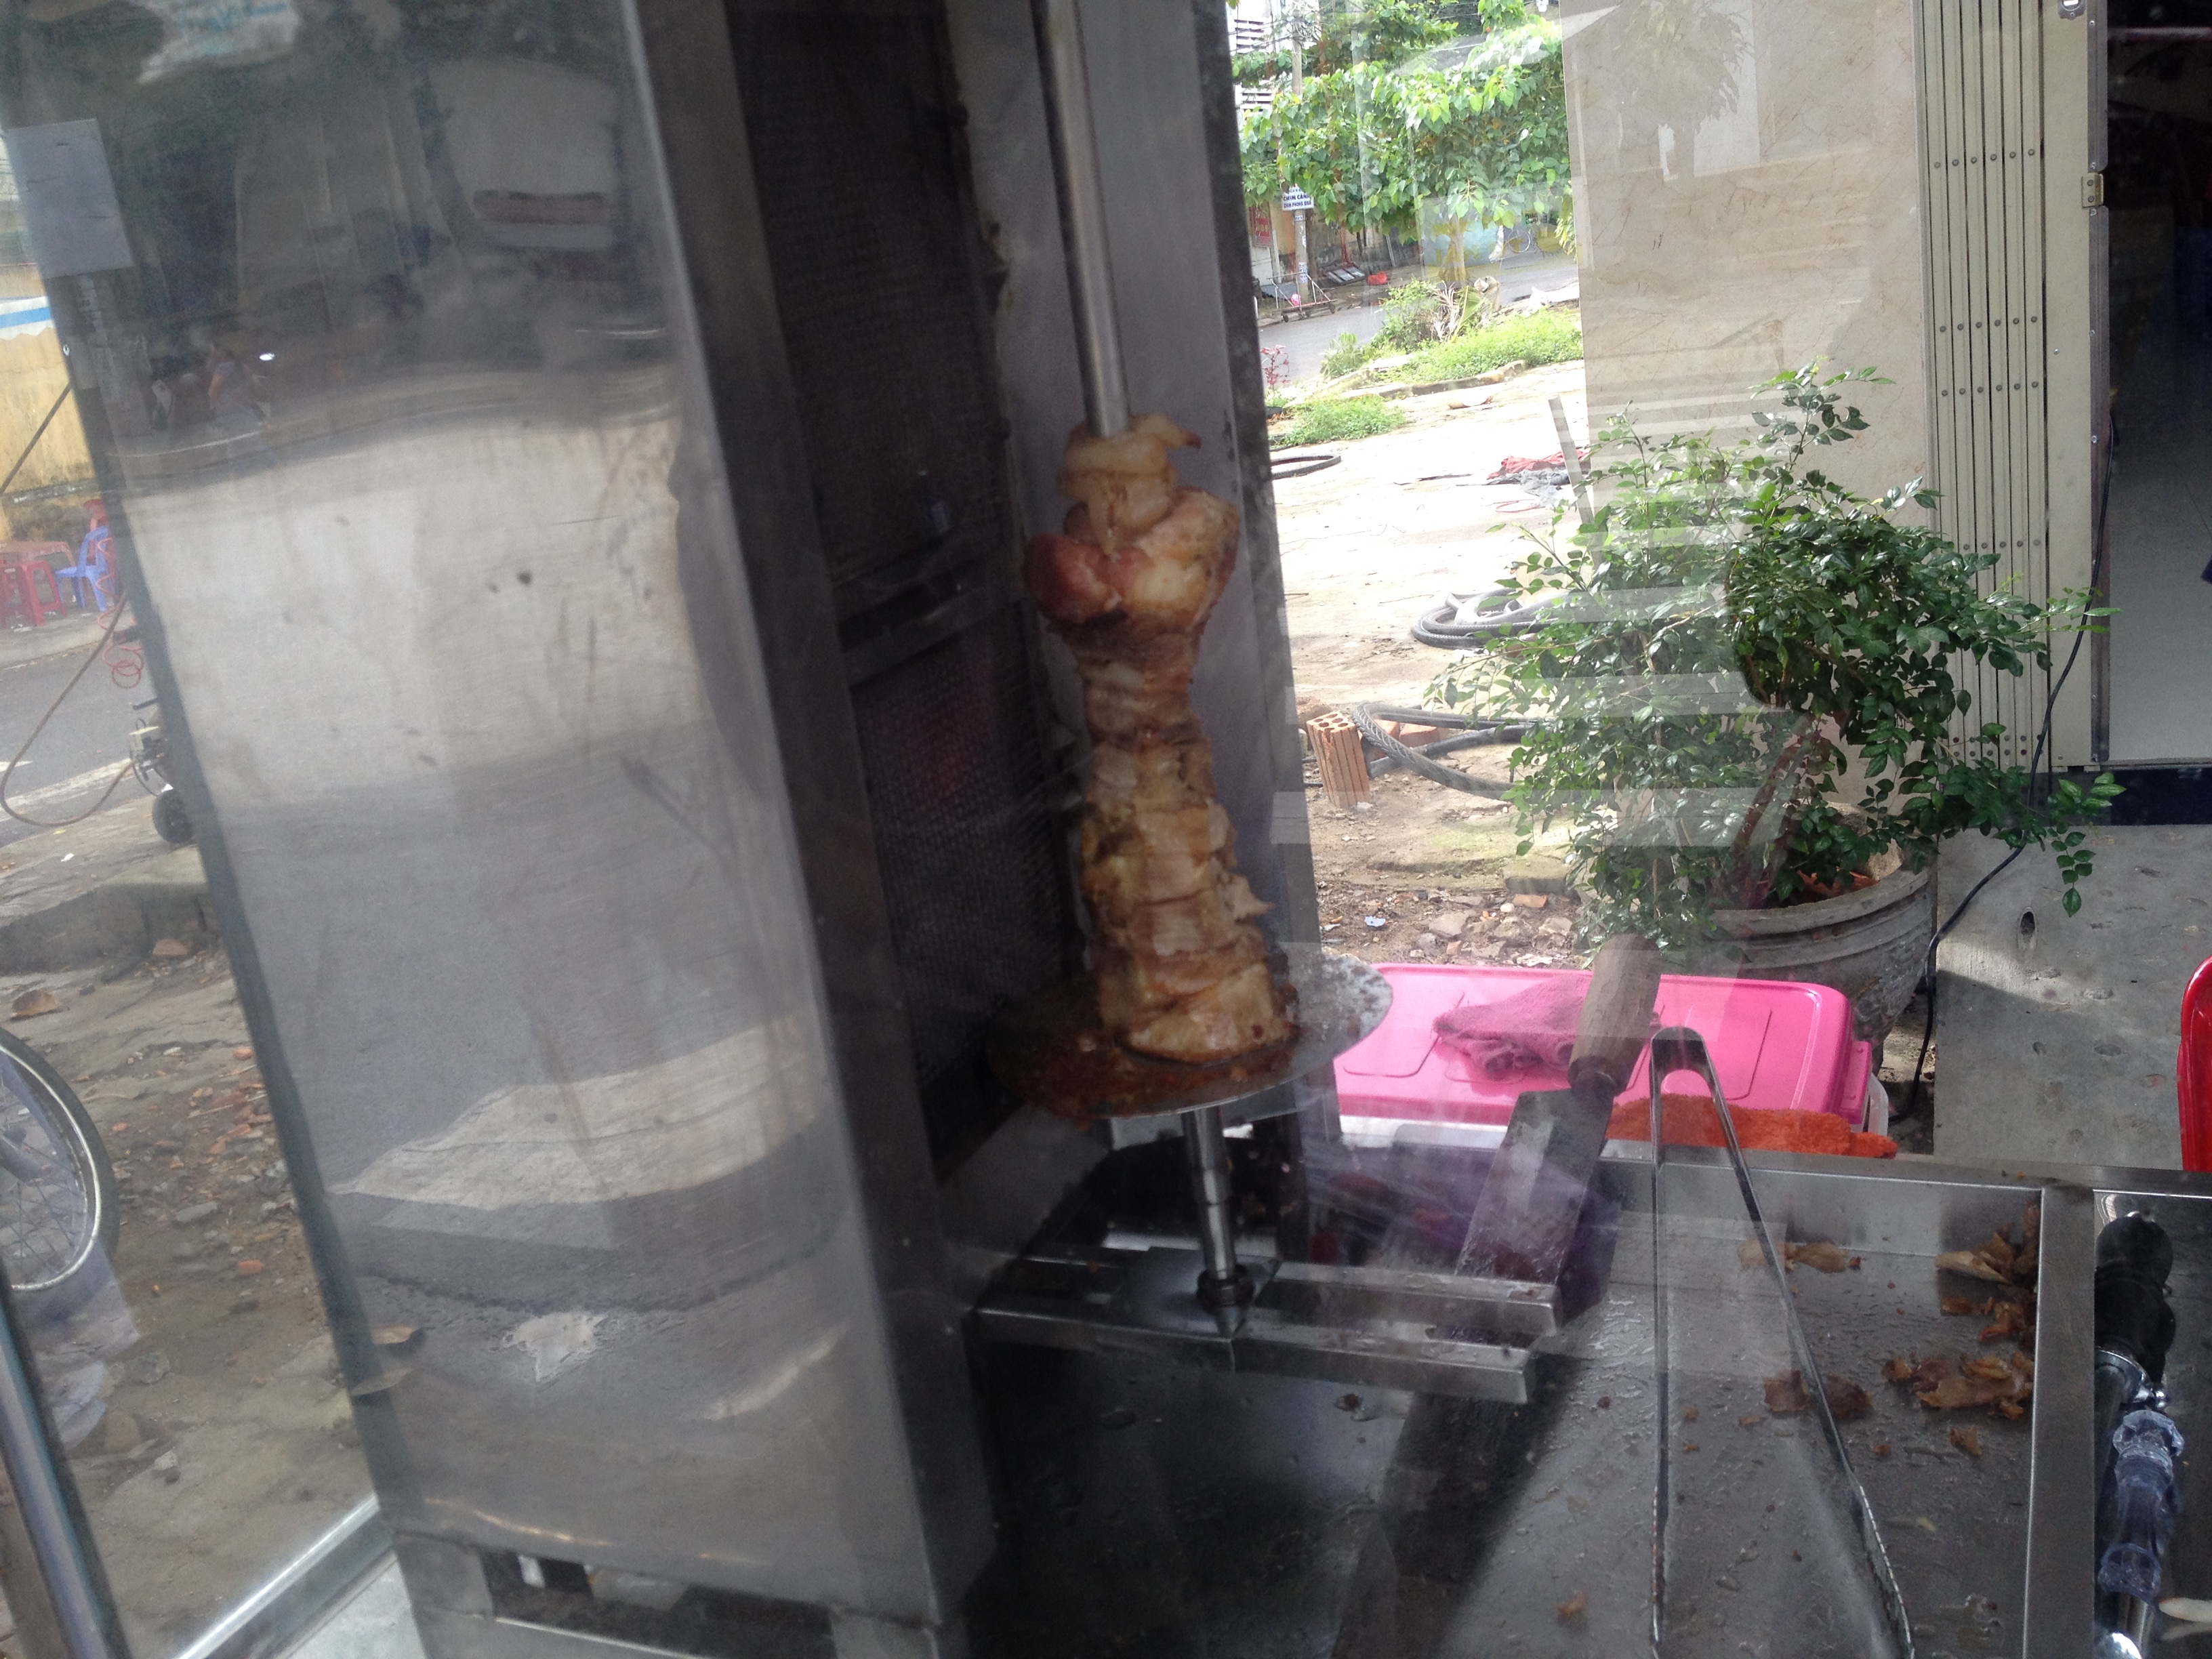 Kebab meat on the spit